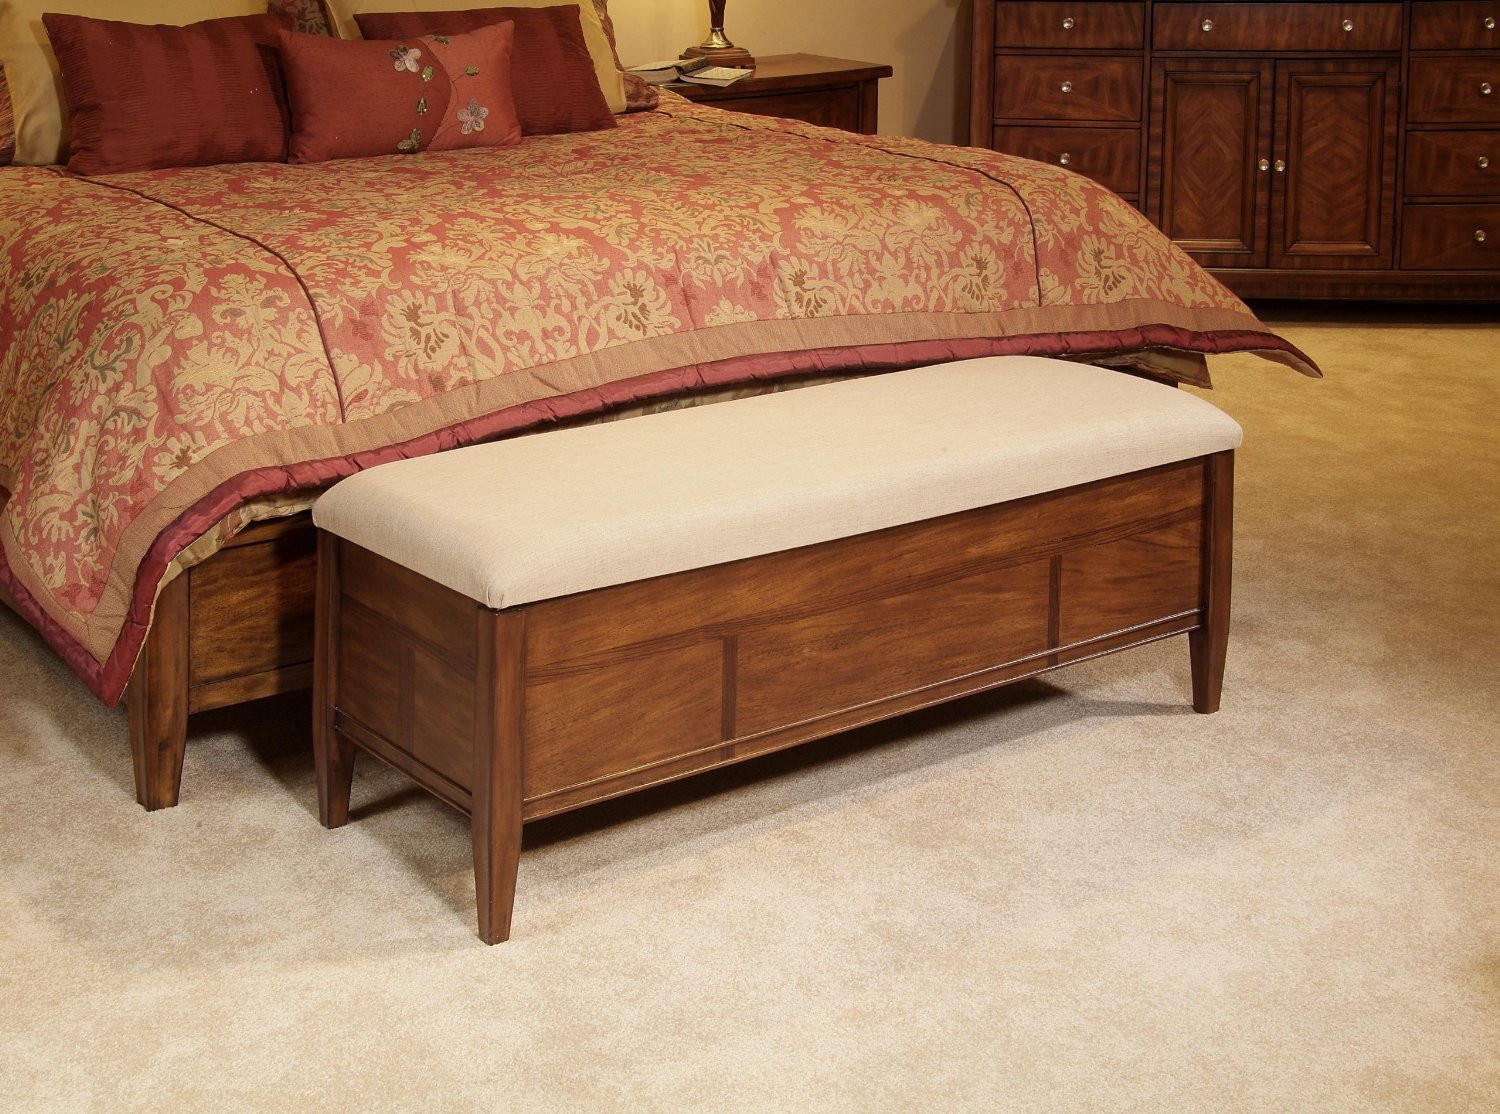 Bedroom Bench With Storage
 Bedroom Benches with Storage Ideas – HomesFeed